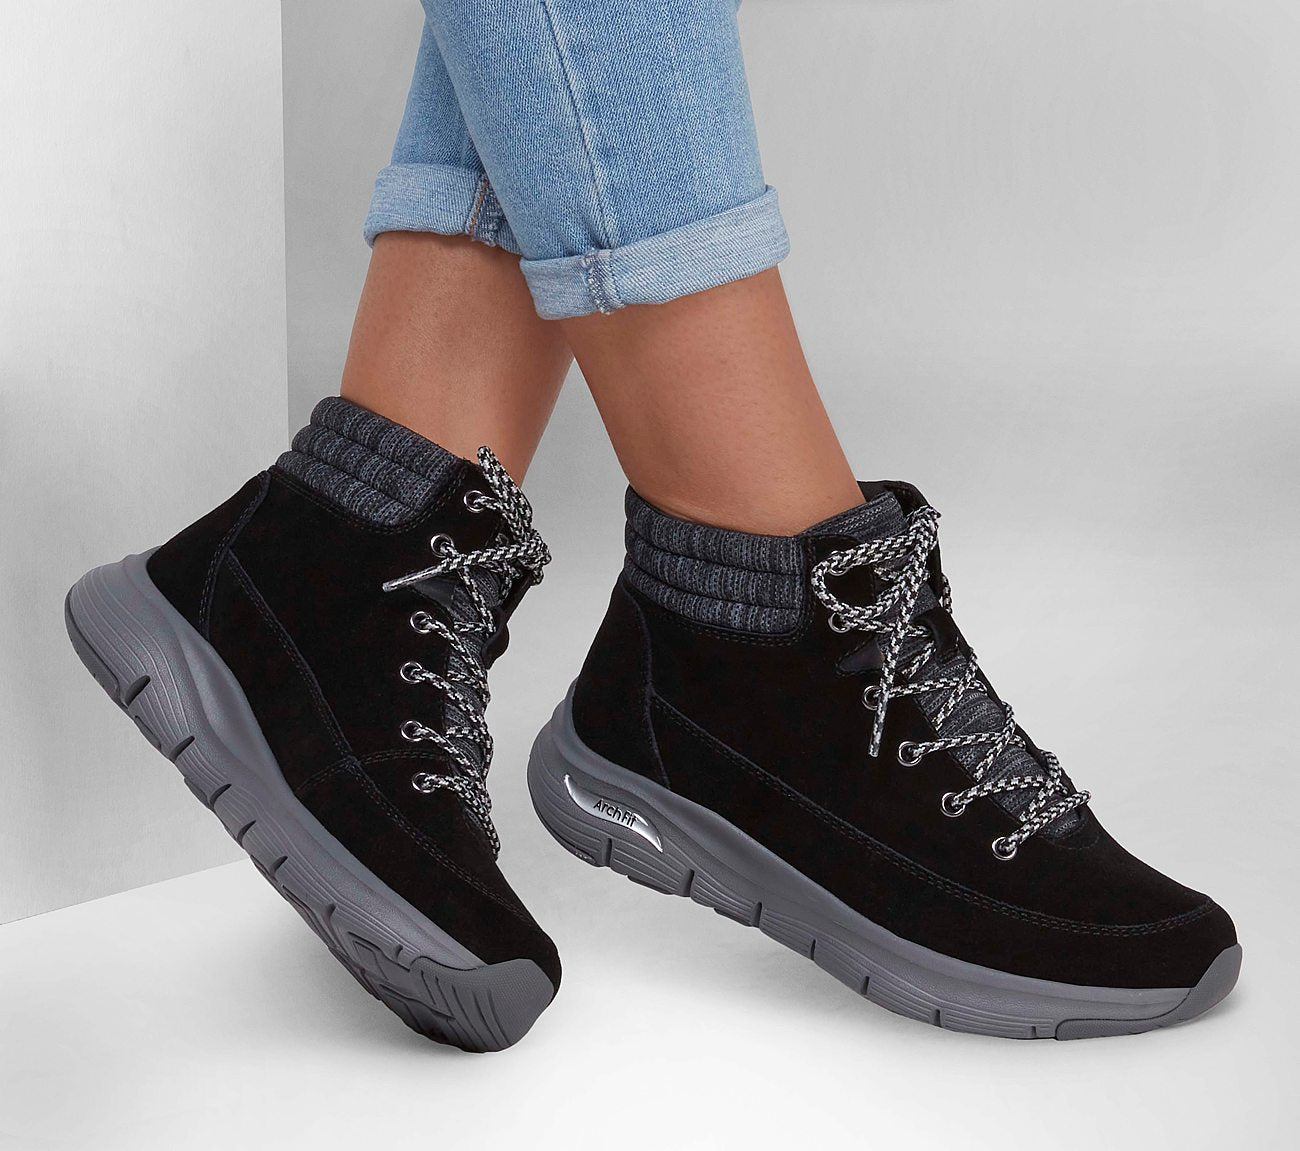 Arch Fit Smooth Comfy Chill - Water Repellent Boot Skechers